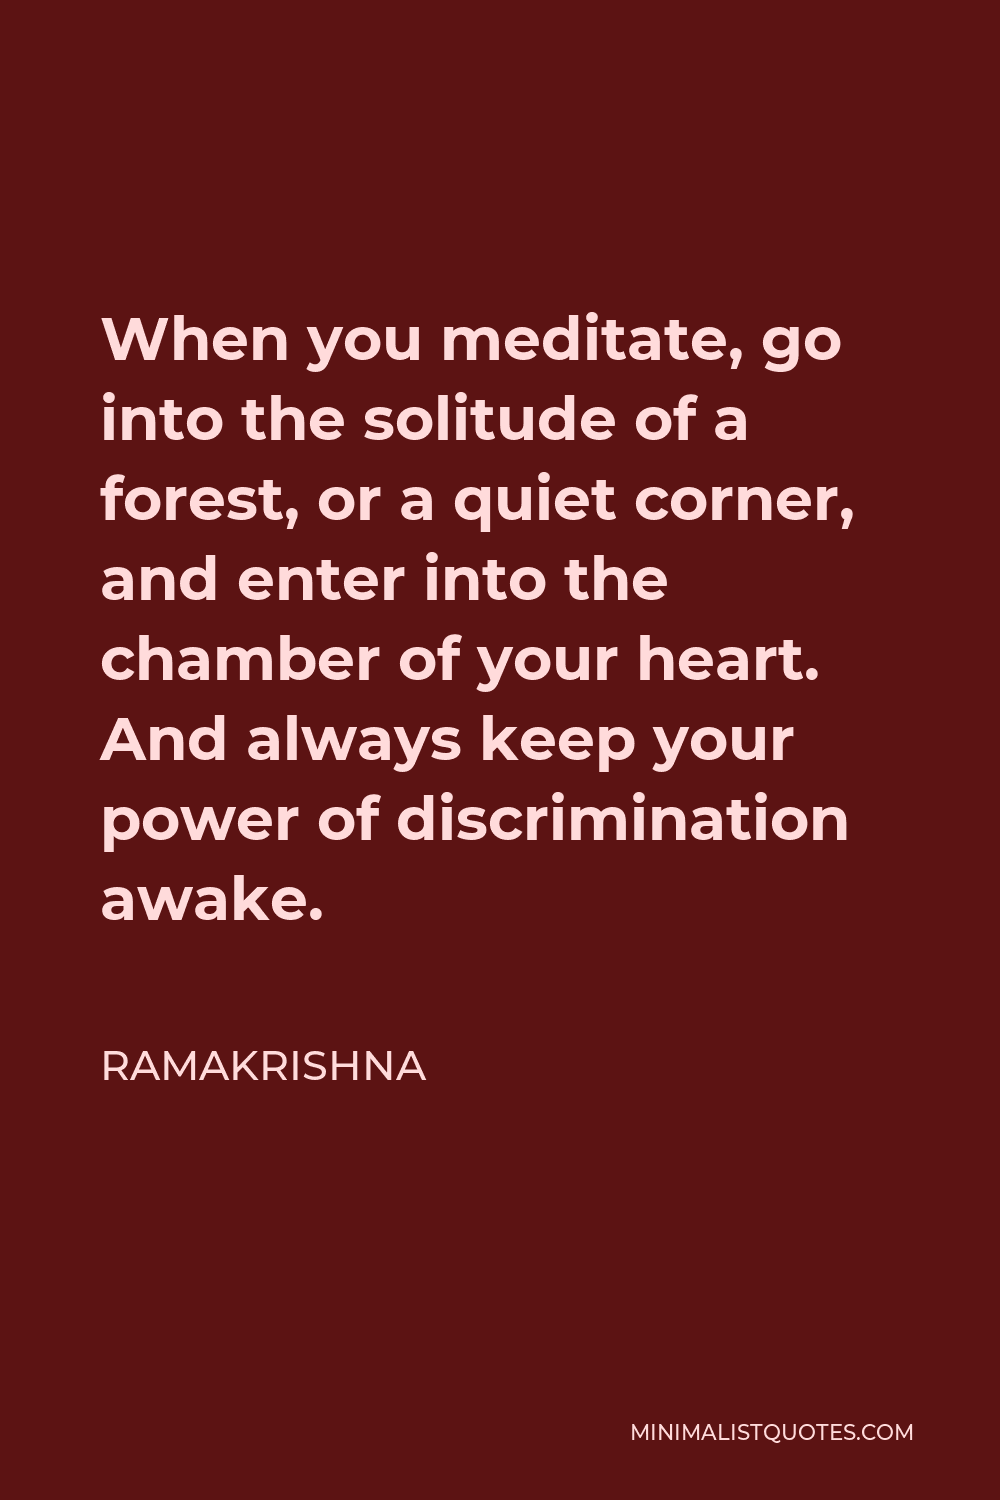 Ramakrishna Quote - When you meditate, go into the solitude of a forest, or a quiet corner, and enter into the chamber of your heart. And always keep your power of discrimination awake.